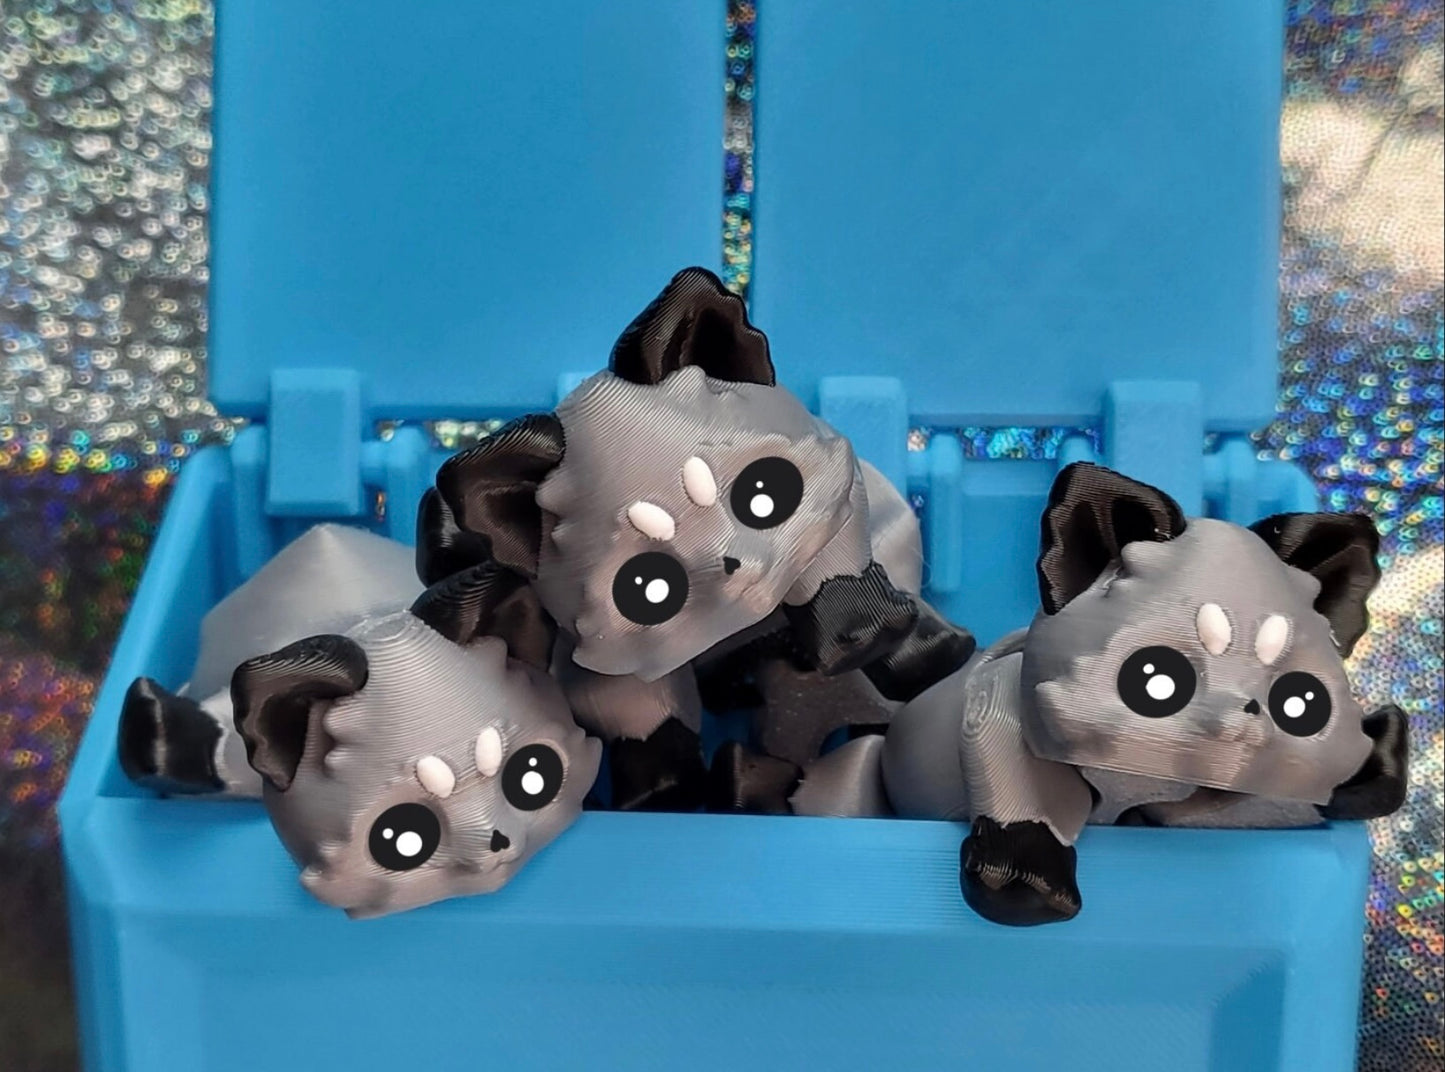 Articulated Raccoons With Dumpster. Adult Desk Toy.